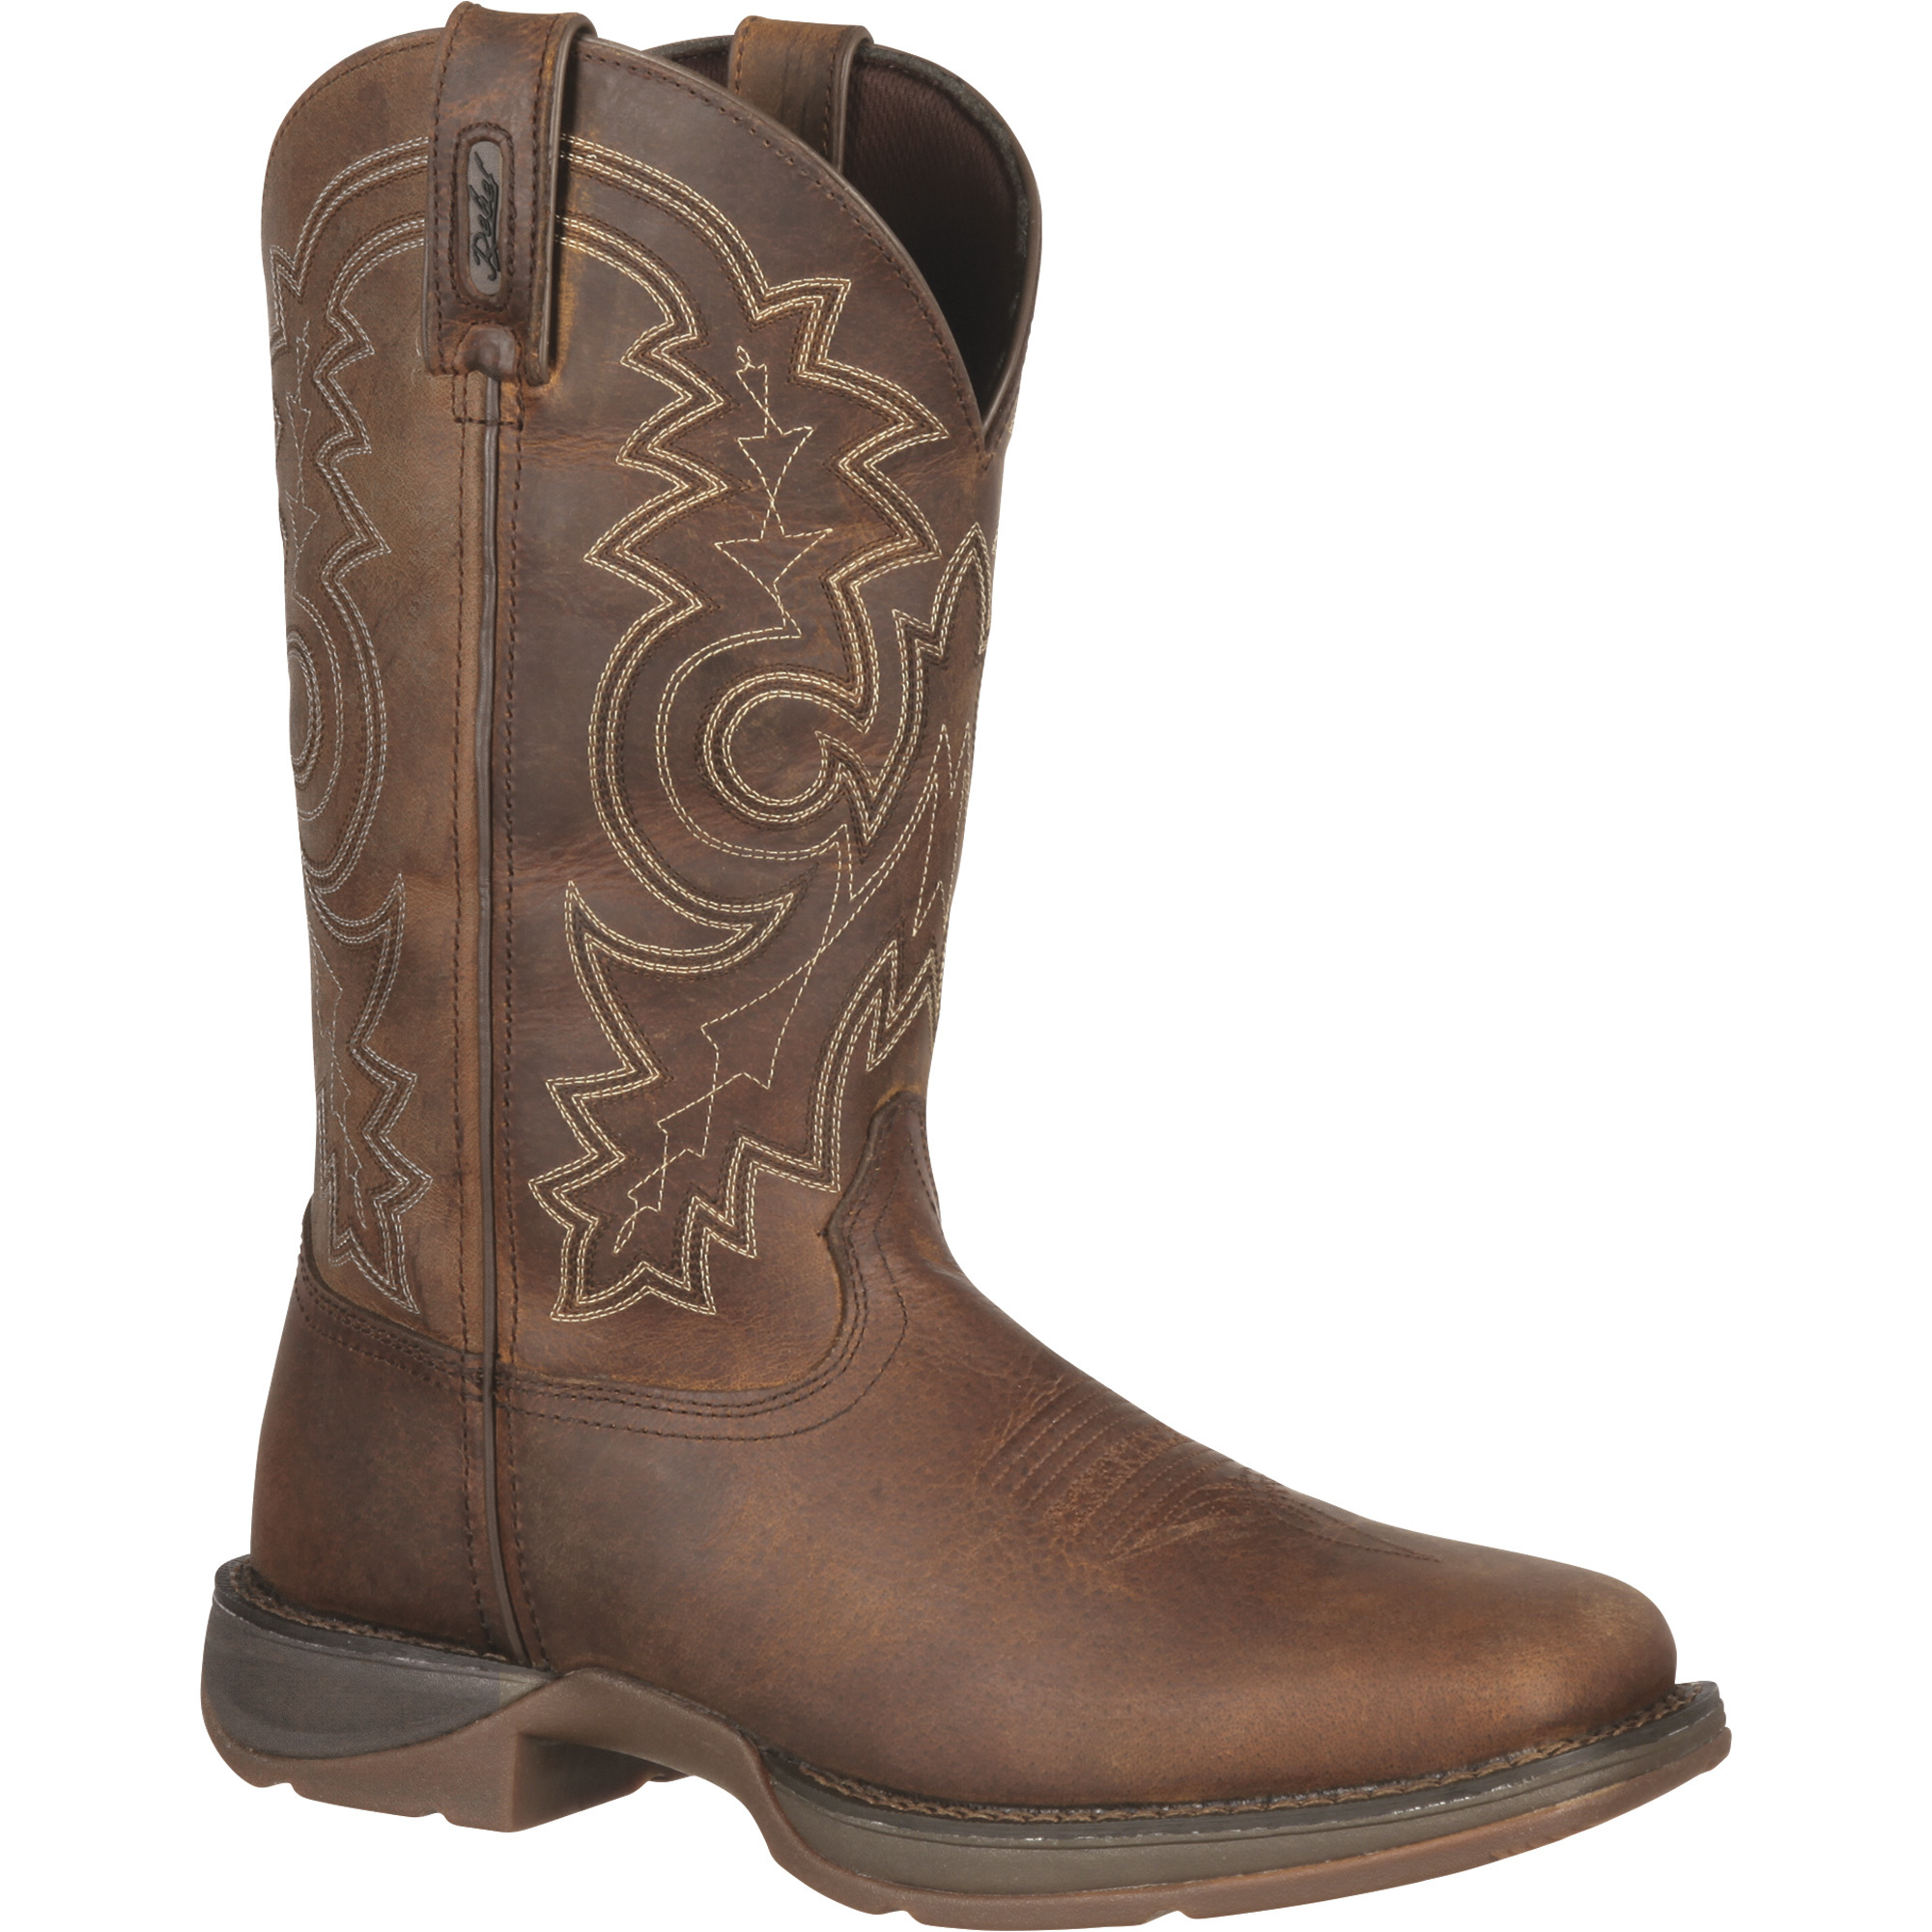 Durango Rebel 11Inch Square-Toe Western Boots - Brown, Size 10 1/2 Wide, Model DB4443